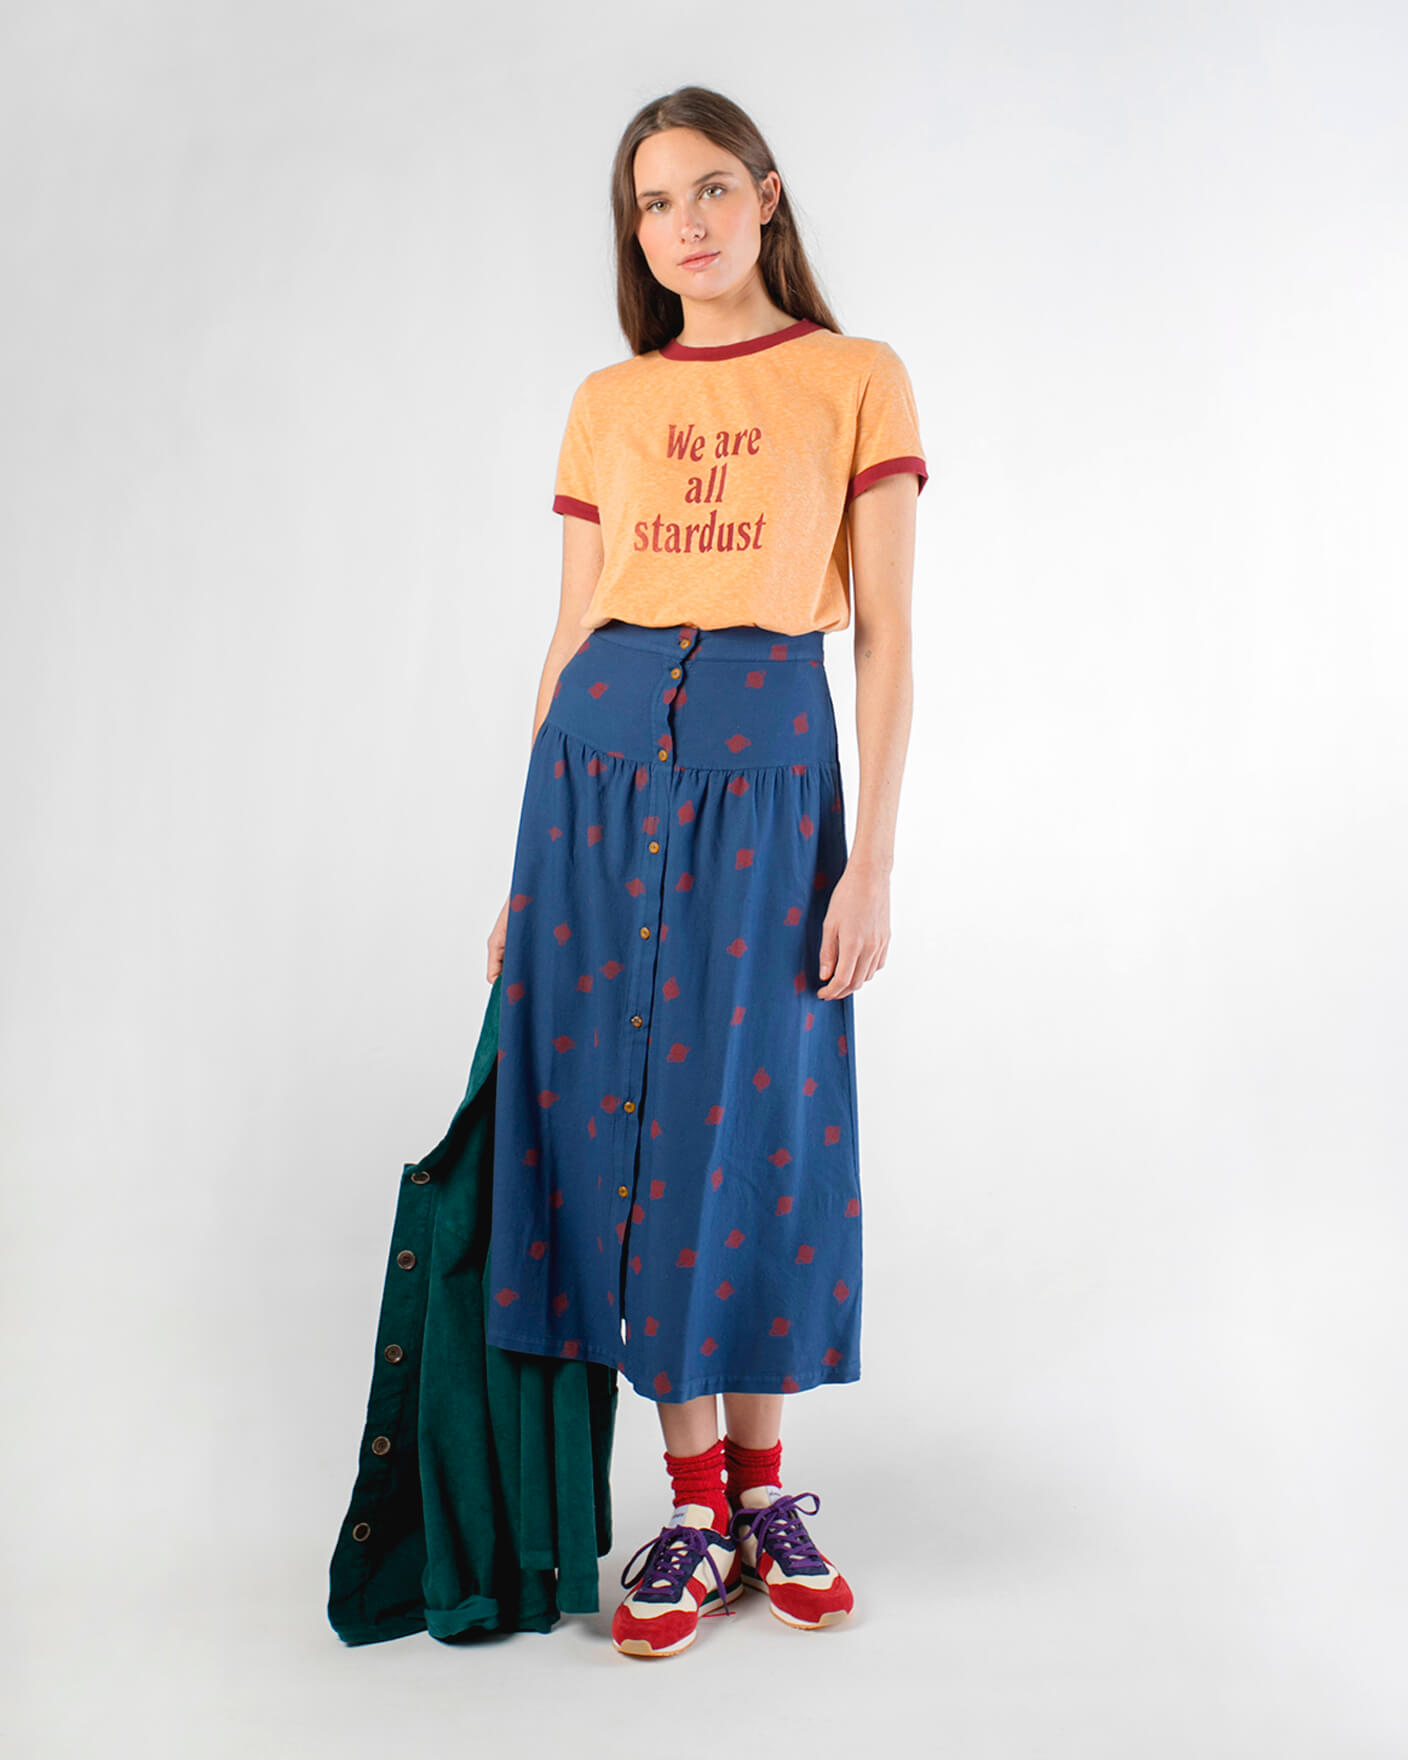 GROWING-YOUNG WE COSMOS AW19/20 BY BOBO CHOSES